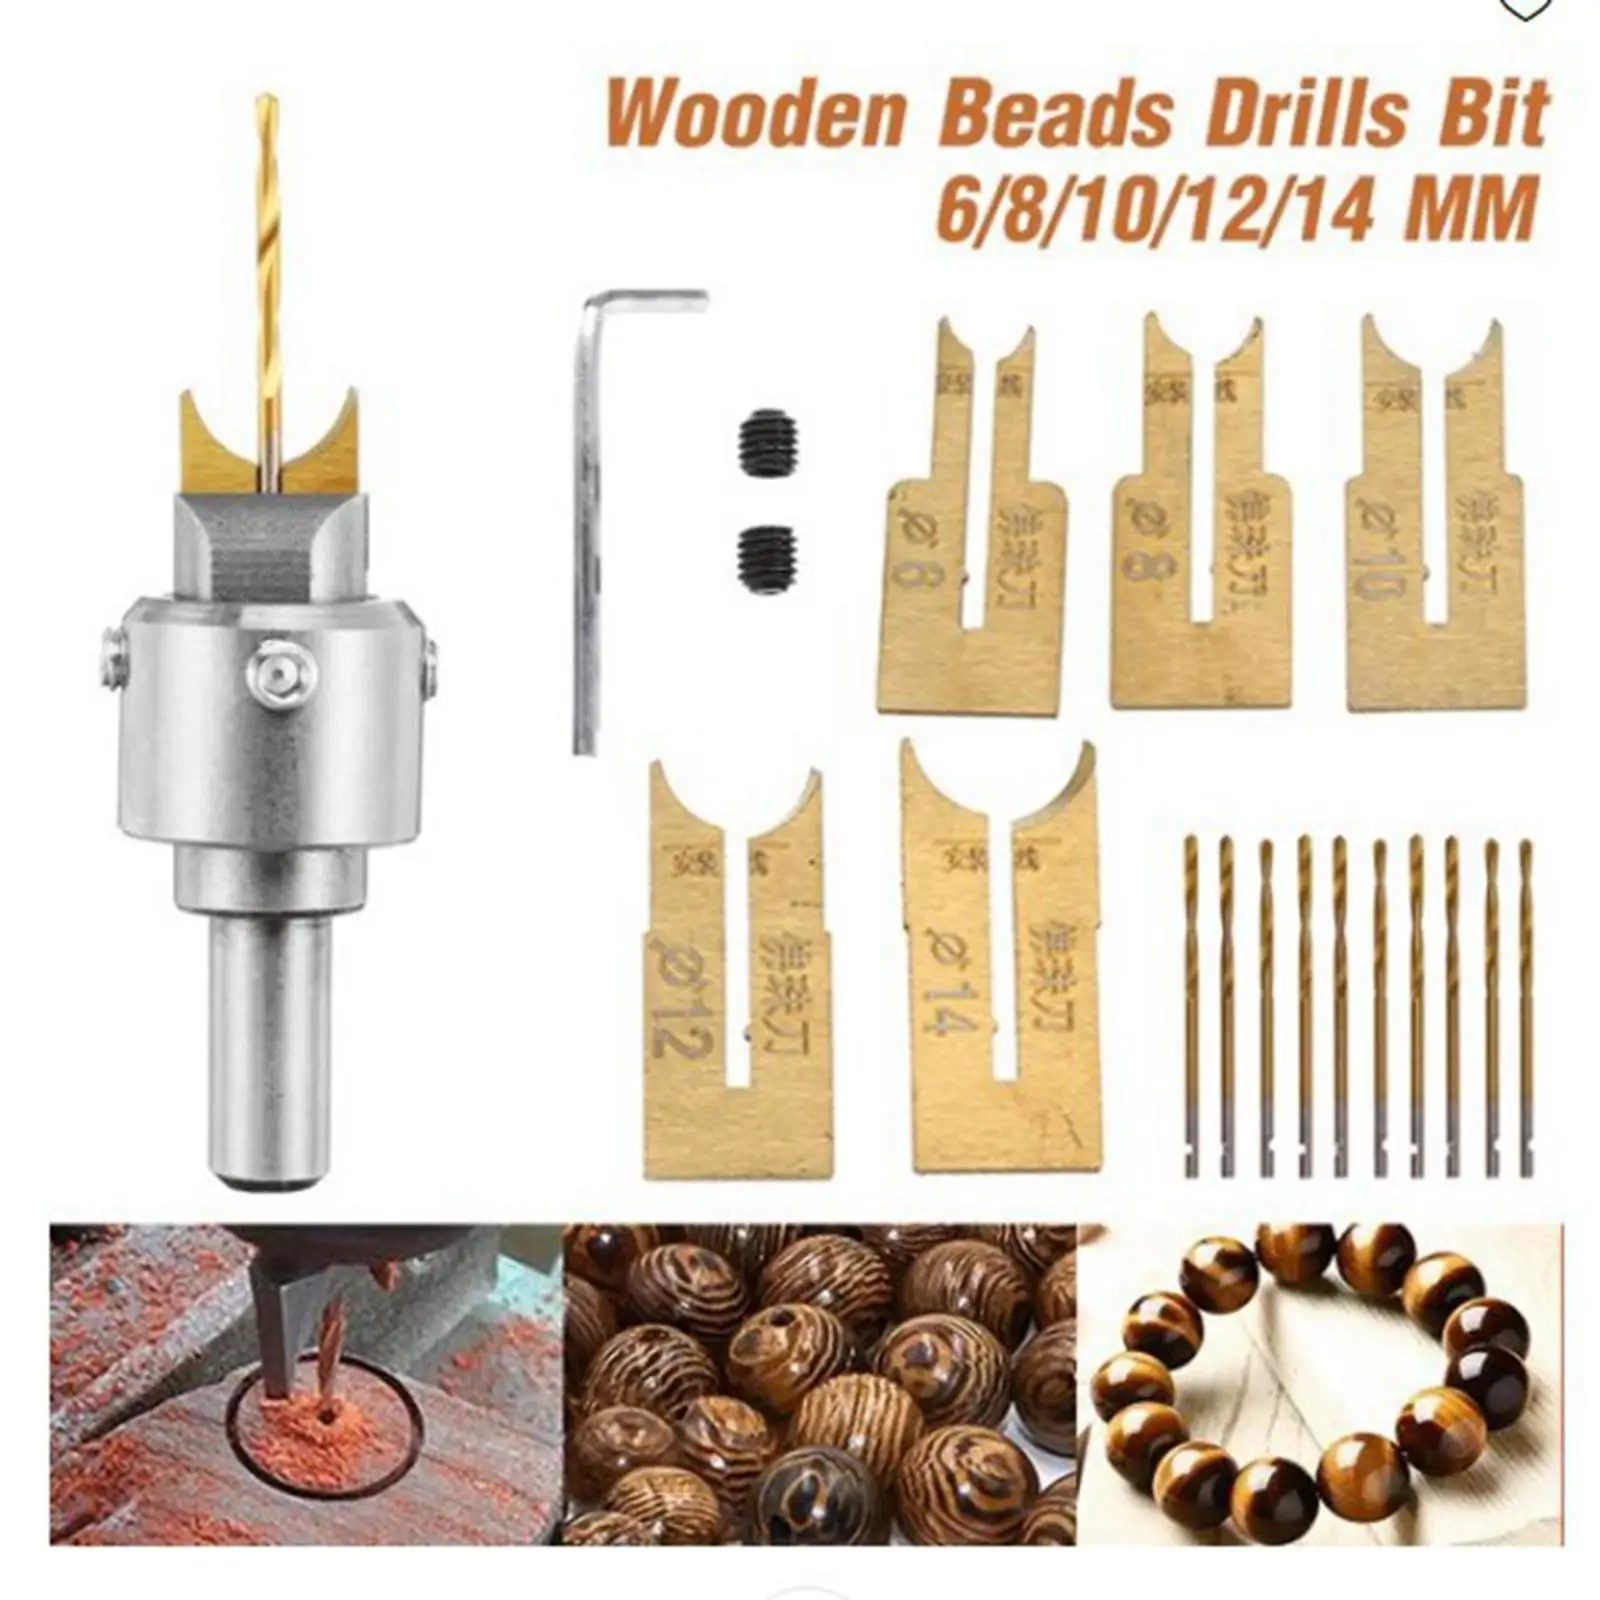 Wooden Beads , Wood Bead Maker Woodworking Tools Joinery Bits 6/8/10/12/14mm Wood Bead Maker Router Bit for Ebony Rosewood